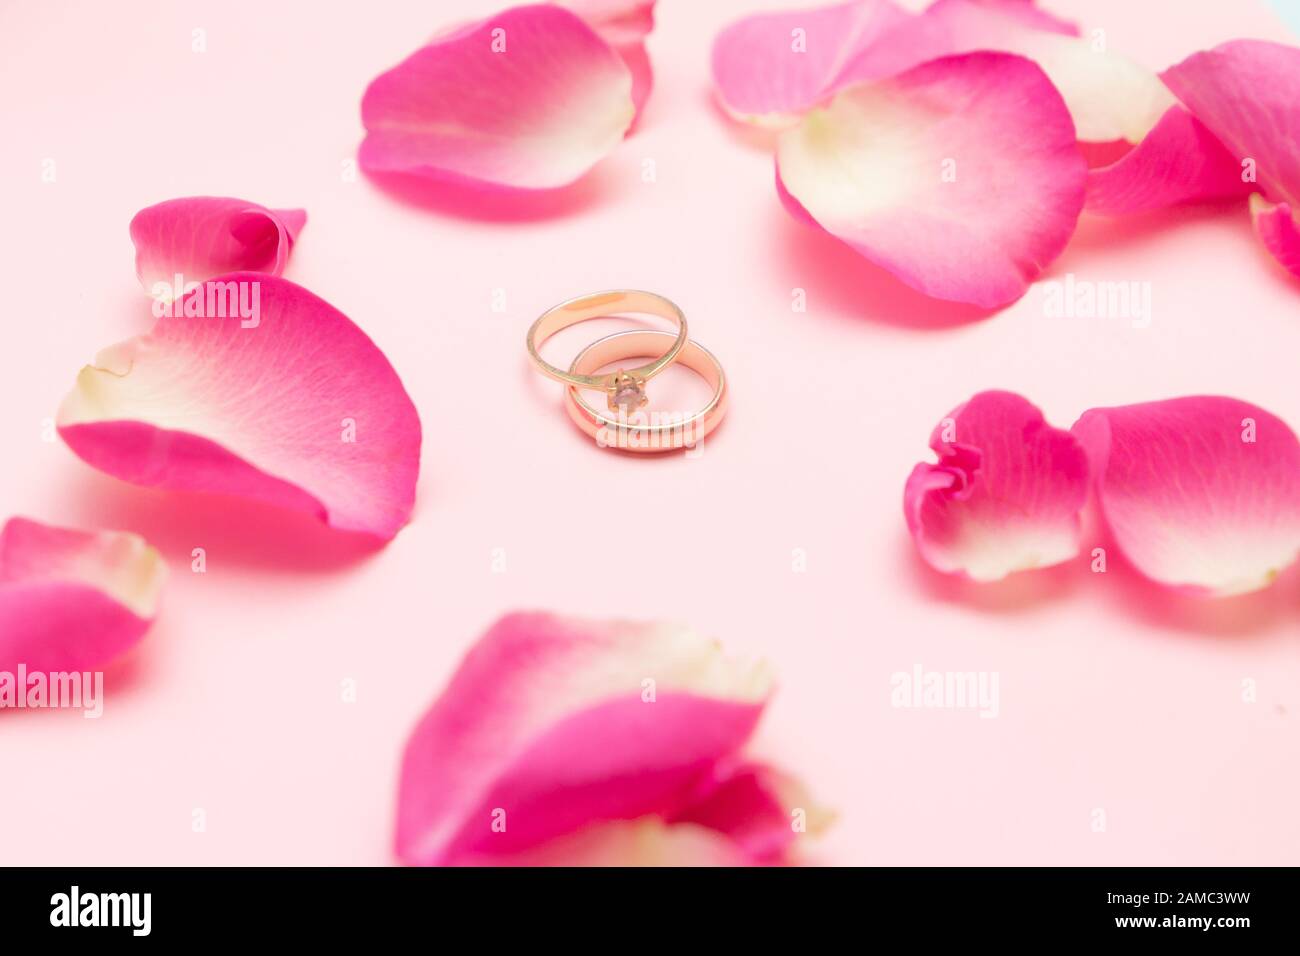 Wedding ring and gold engagement ring with gemstone around roses petals on the pastel pink background. Marriage concept. Happy Valentines day. Stock Photo